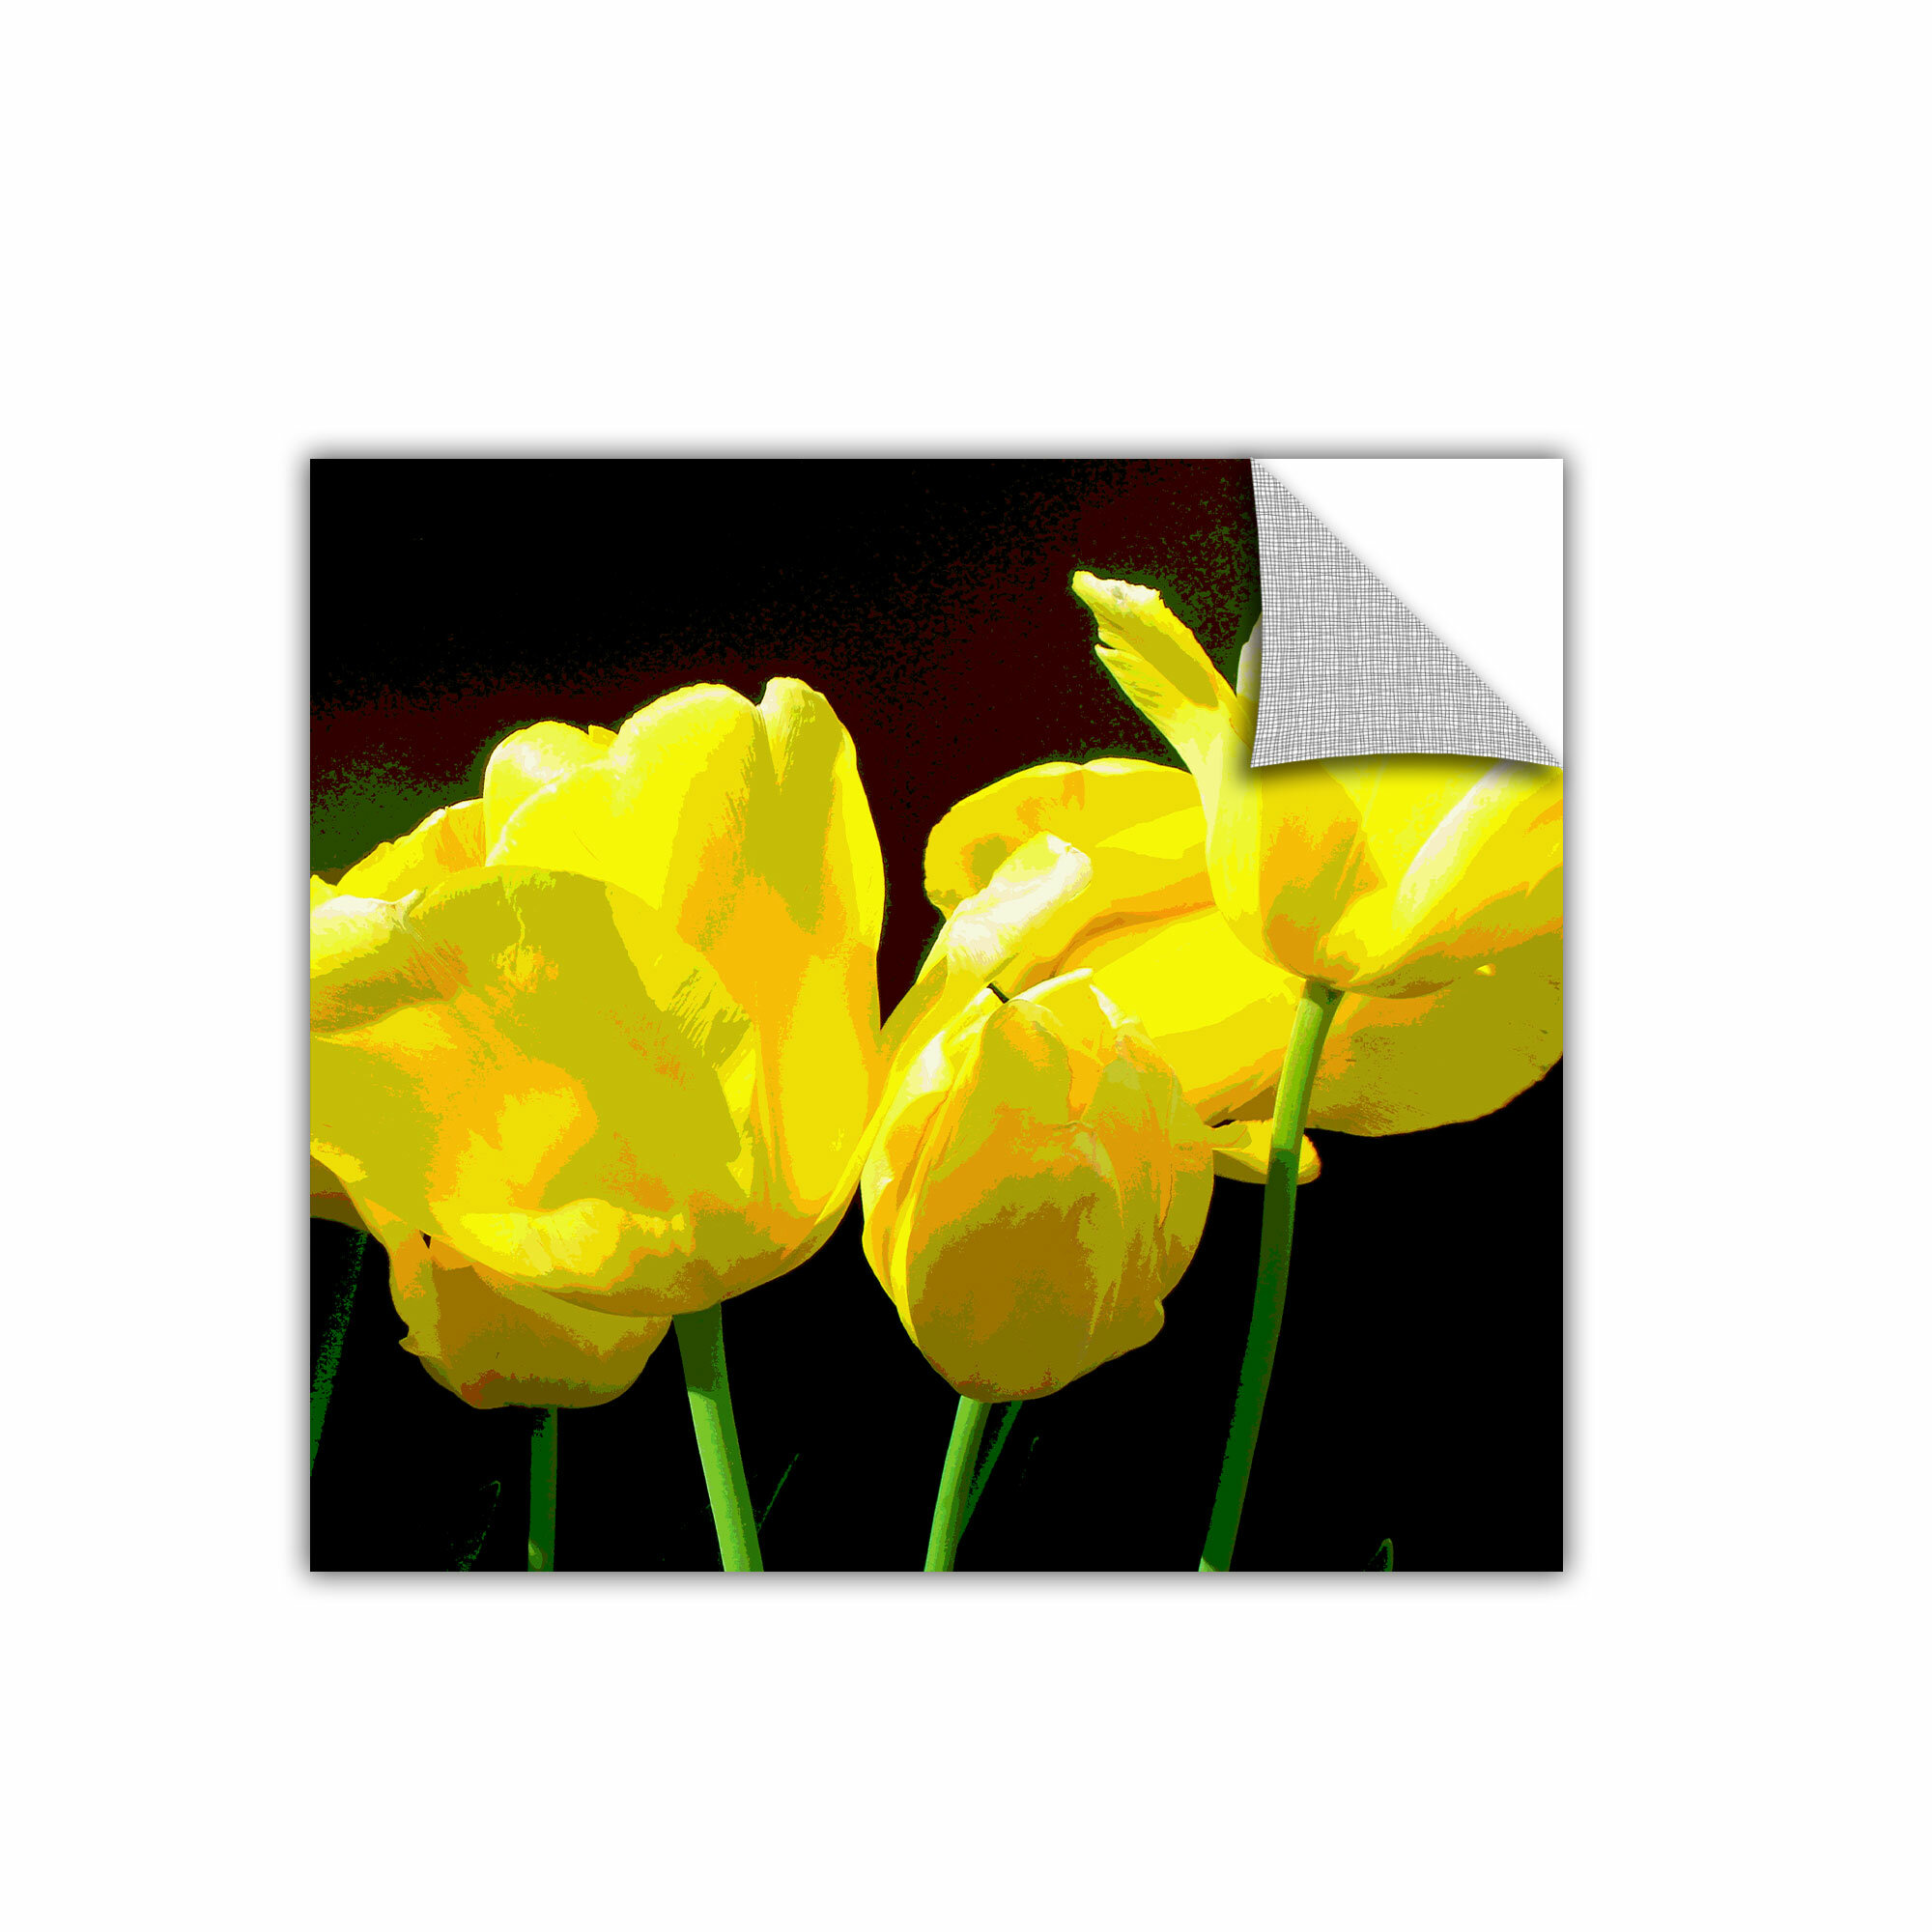 ArtWall Herb Dickinson Yellow Tulips 2 Removable Graphic Wall Art 24 by 24-Inch 